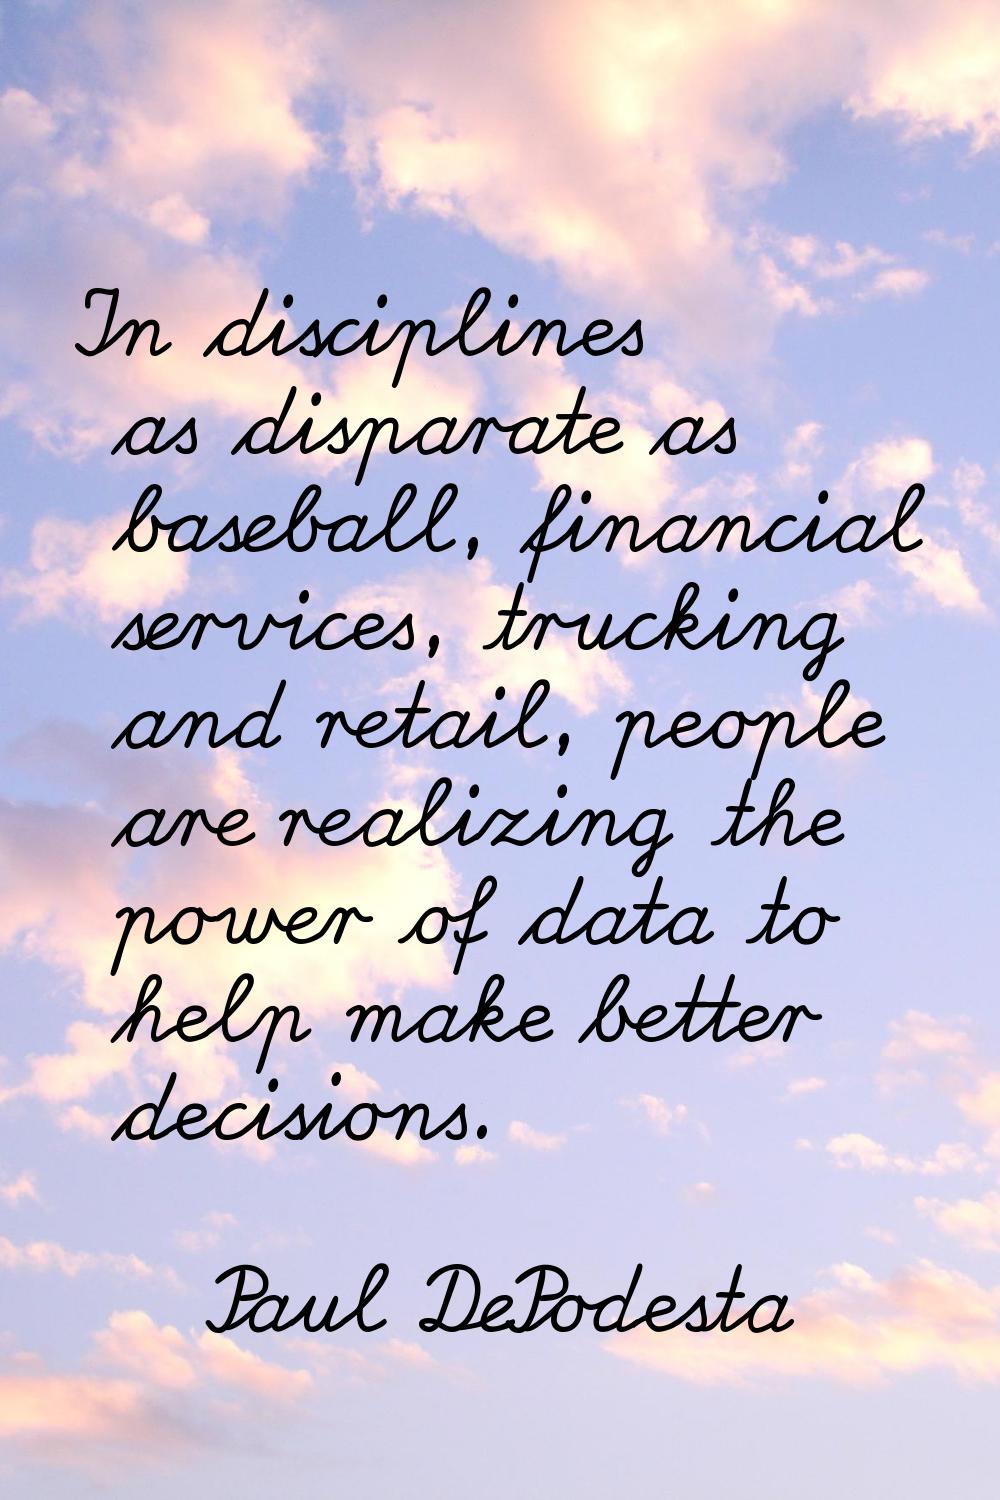 In disciplines as disparate as baseball, financial services, trucking and retail, people are realiz